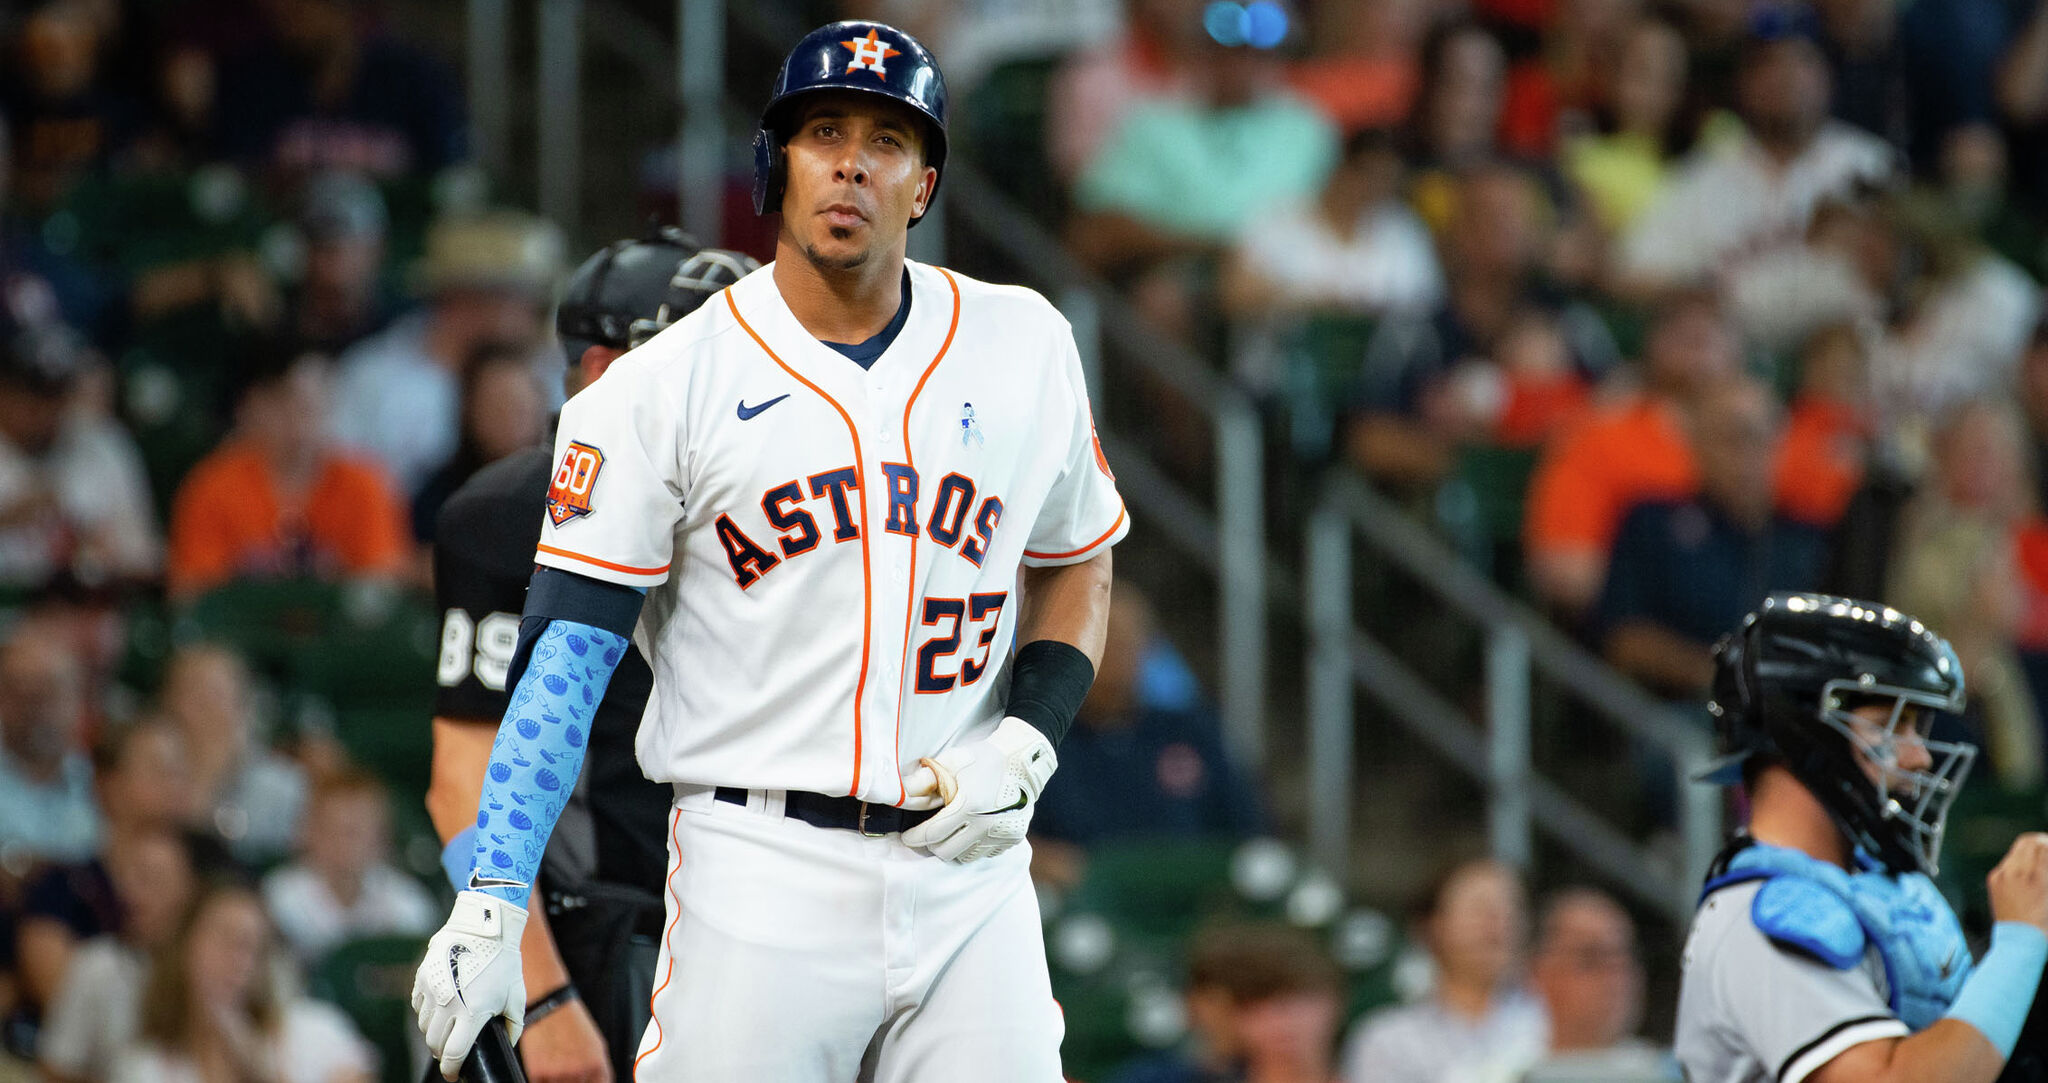 Astros' Michael Brantley Done for the Season, Leaving Many Questions